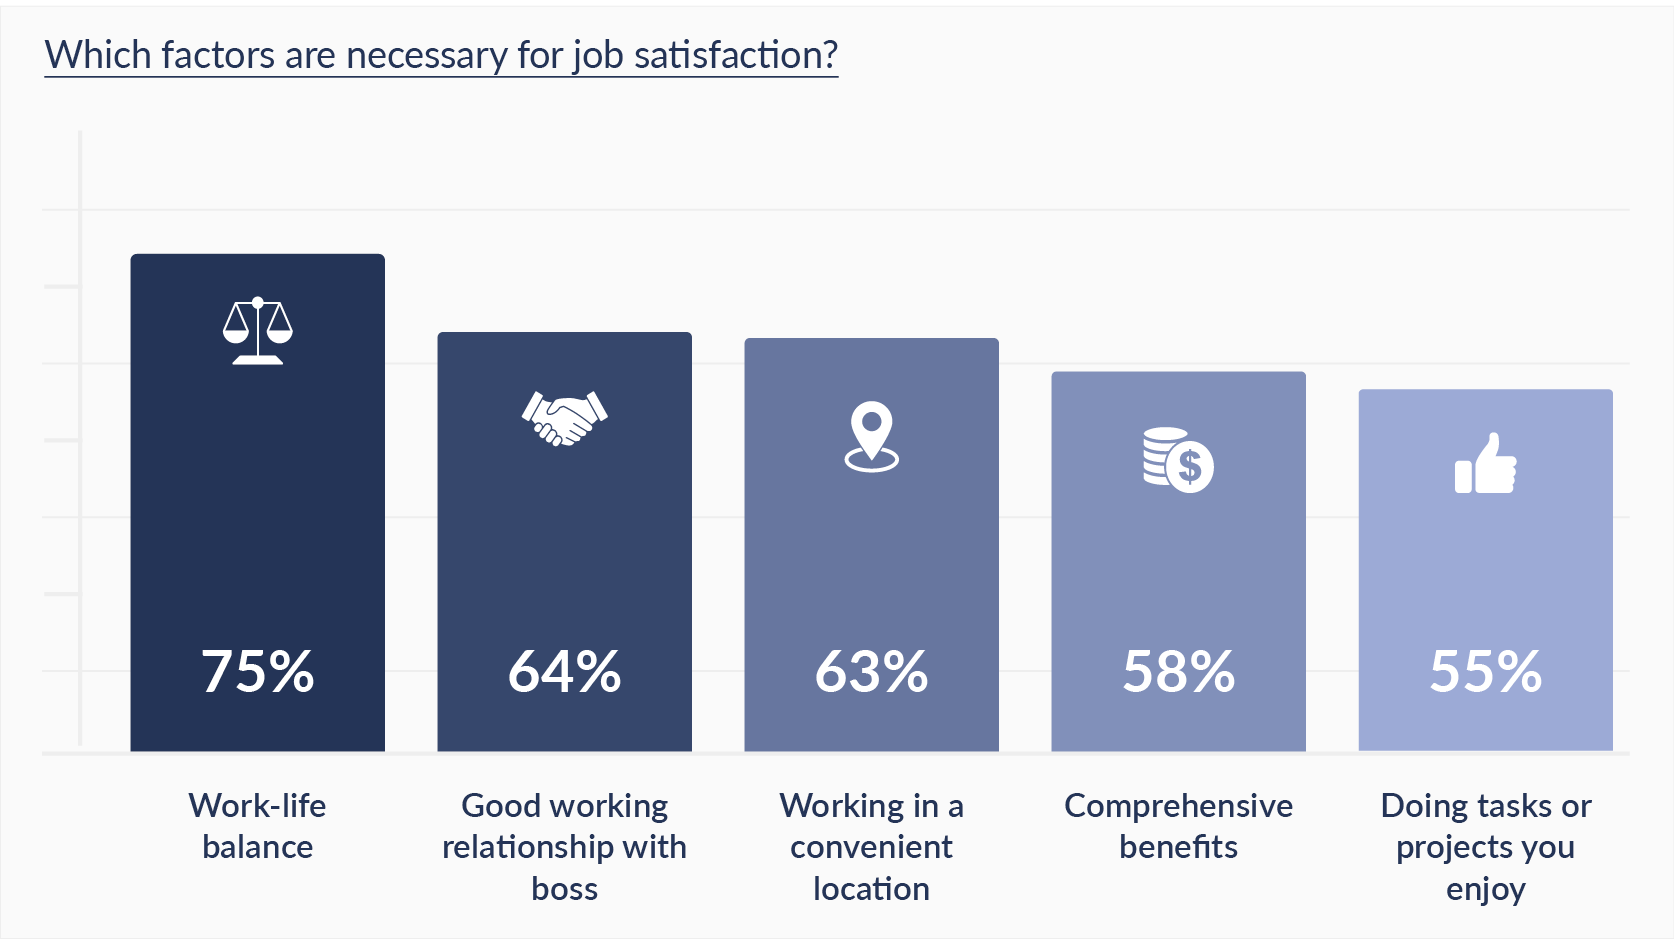 Factors important for hourly worker retention and satisfaction